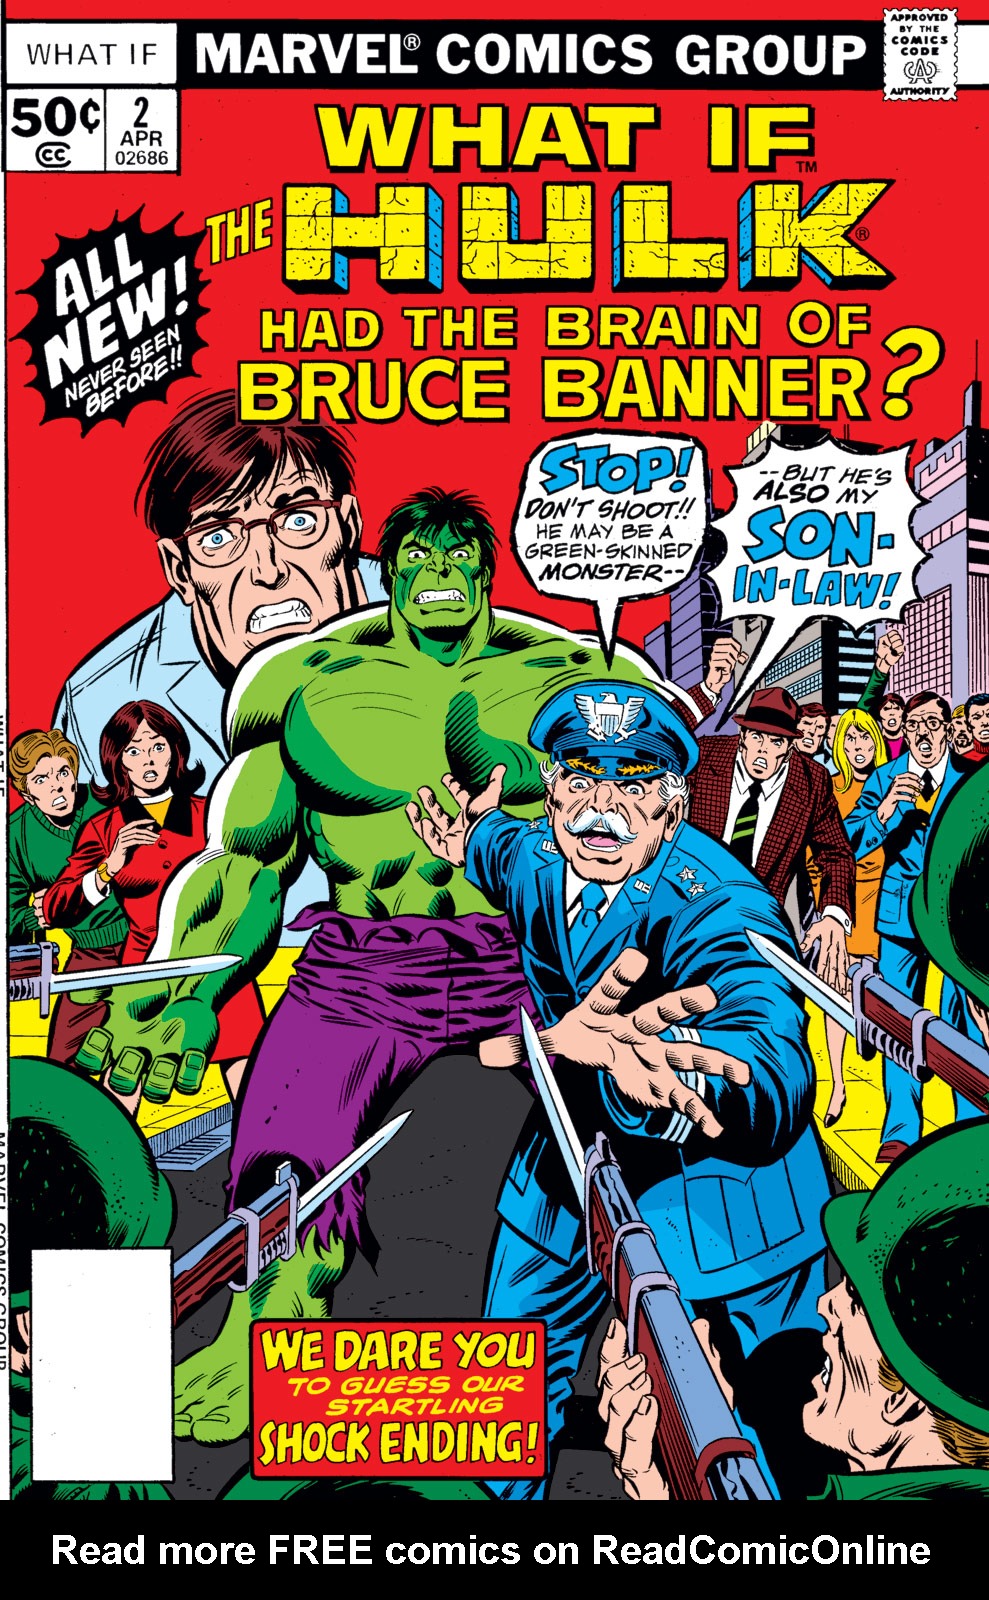 Read online What If? (1977) comic -  Issue #2 - The Hulk had the brain of Bruce Banner - 1